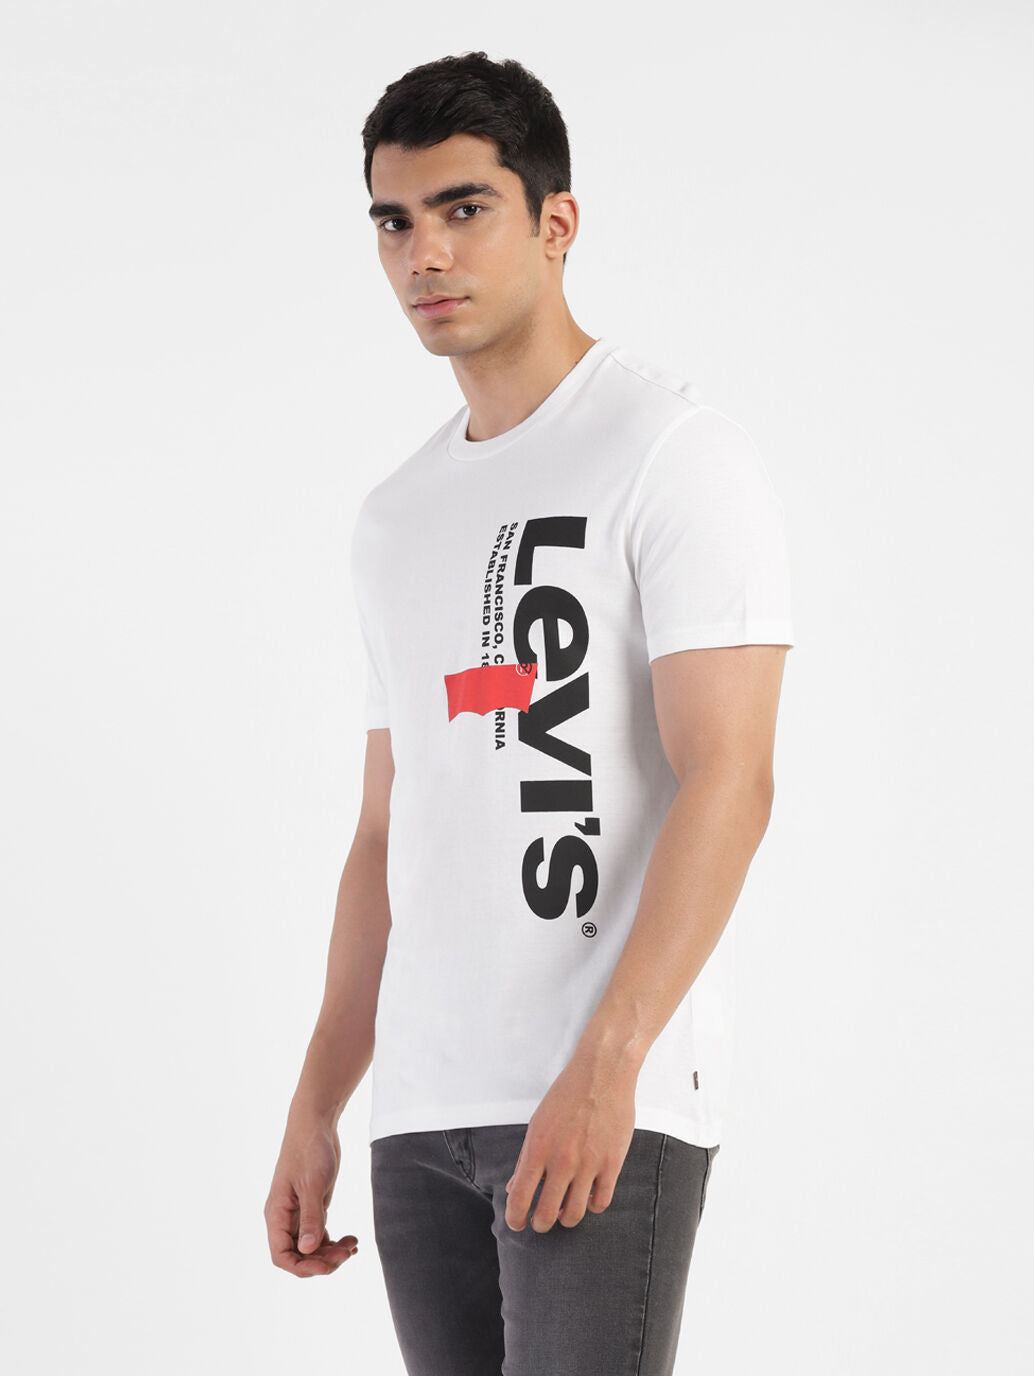 LEVIS SPORTS BRANDED GRAPHIC 16960-0893 T-SHIRT SHORT SLEEVE (M)-4